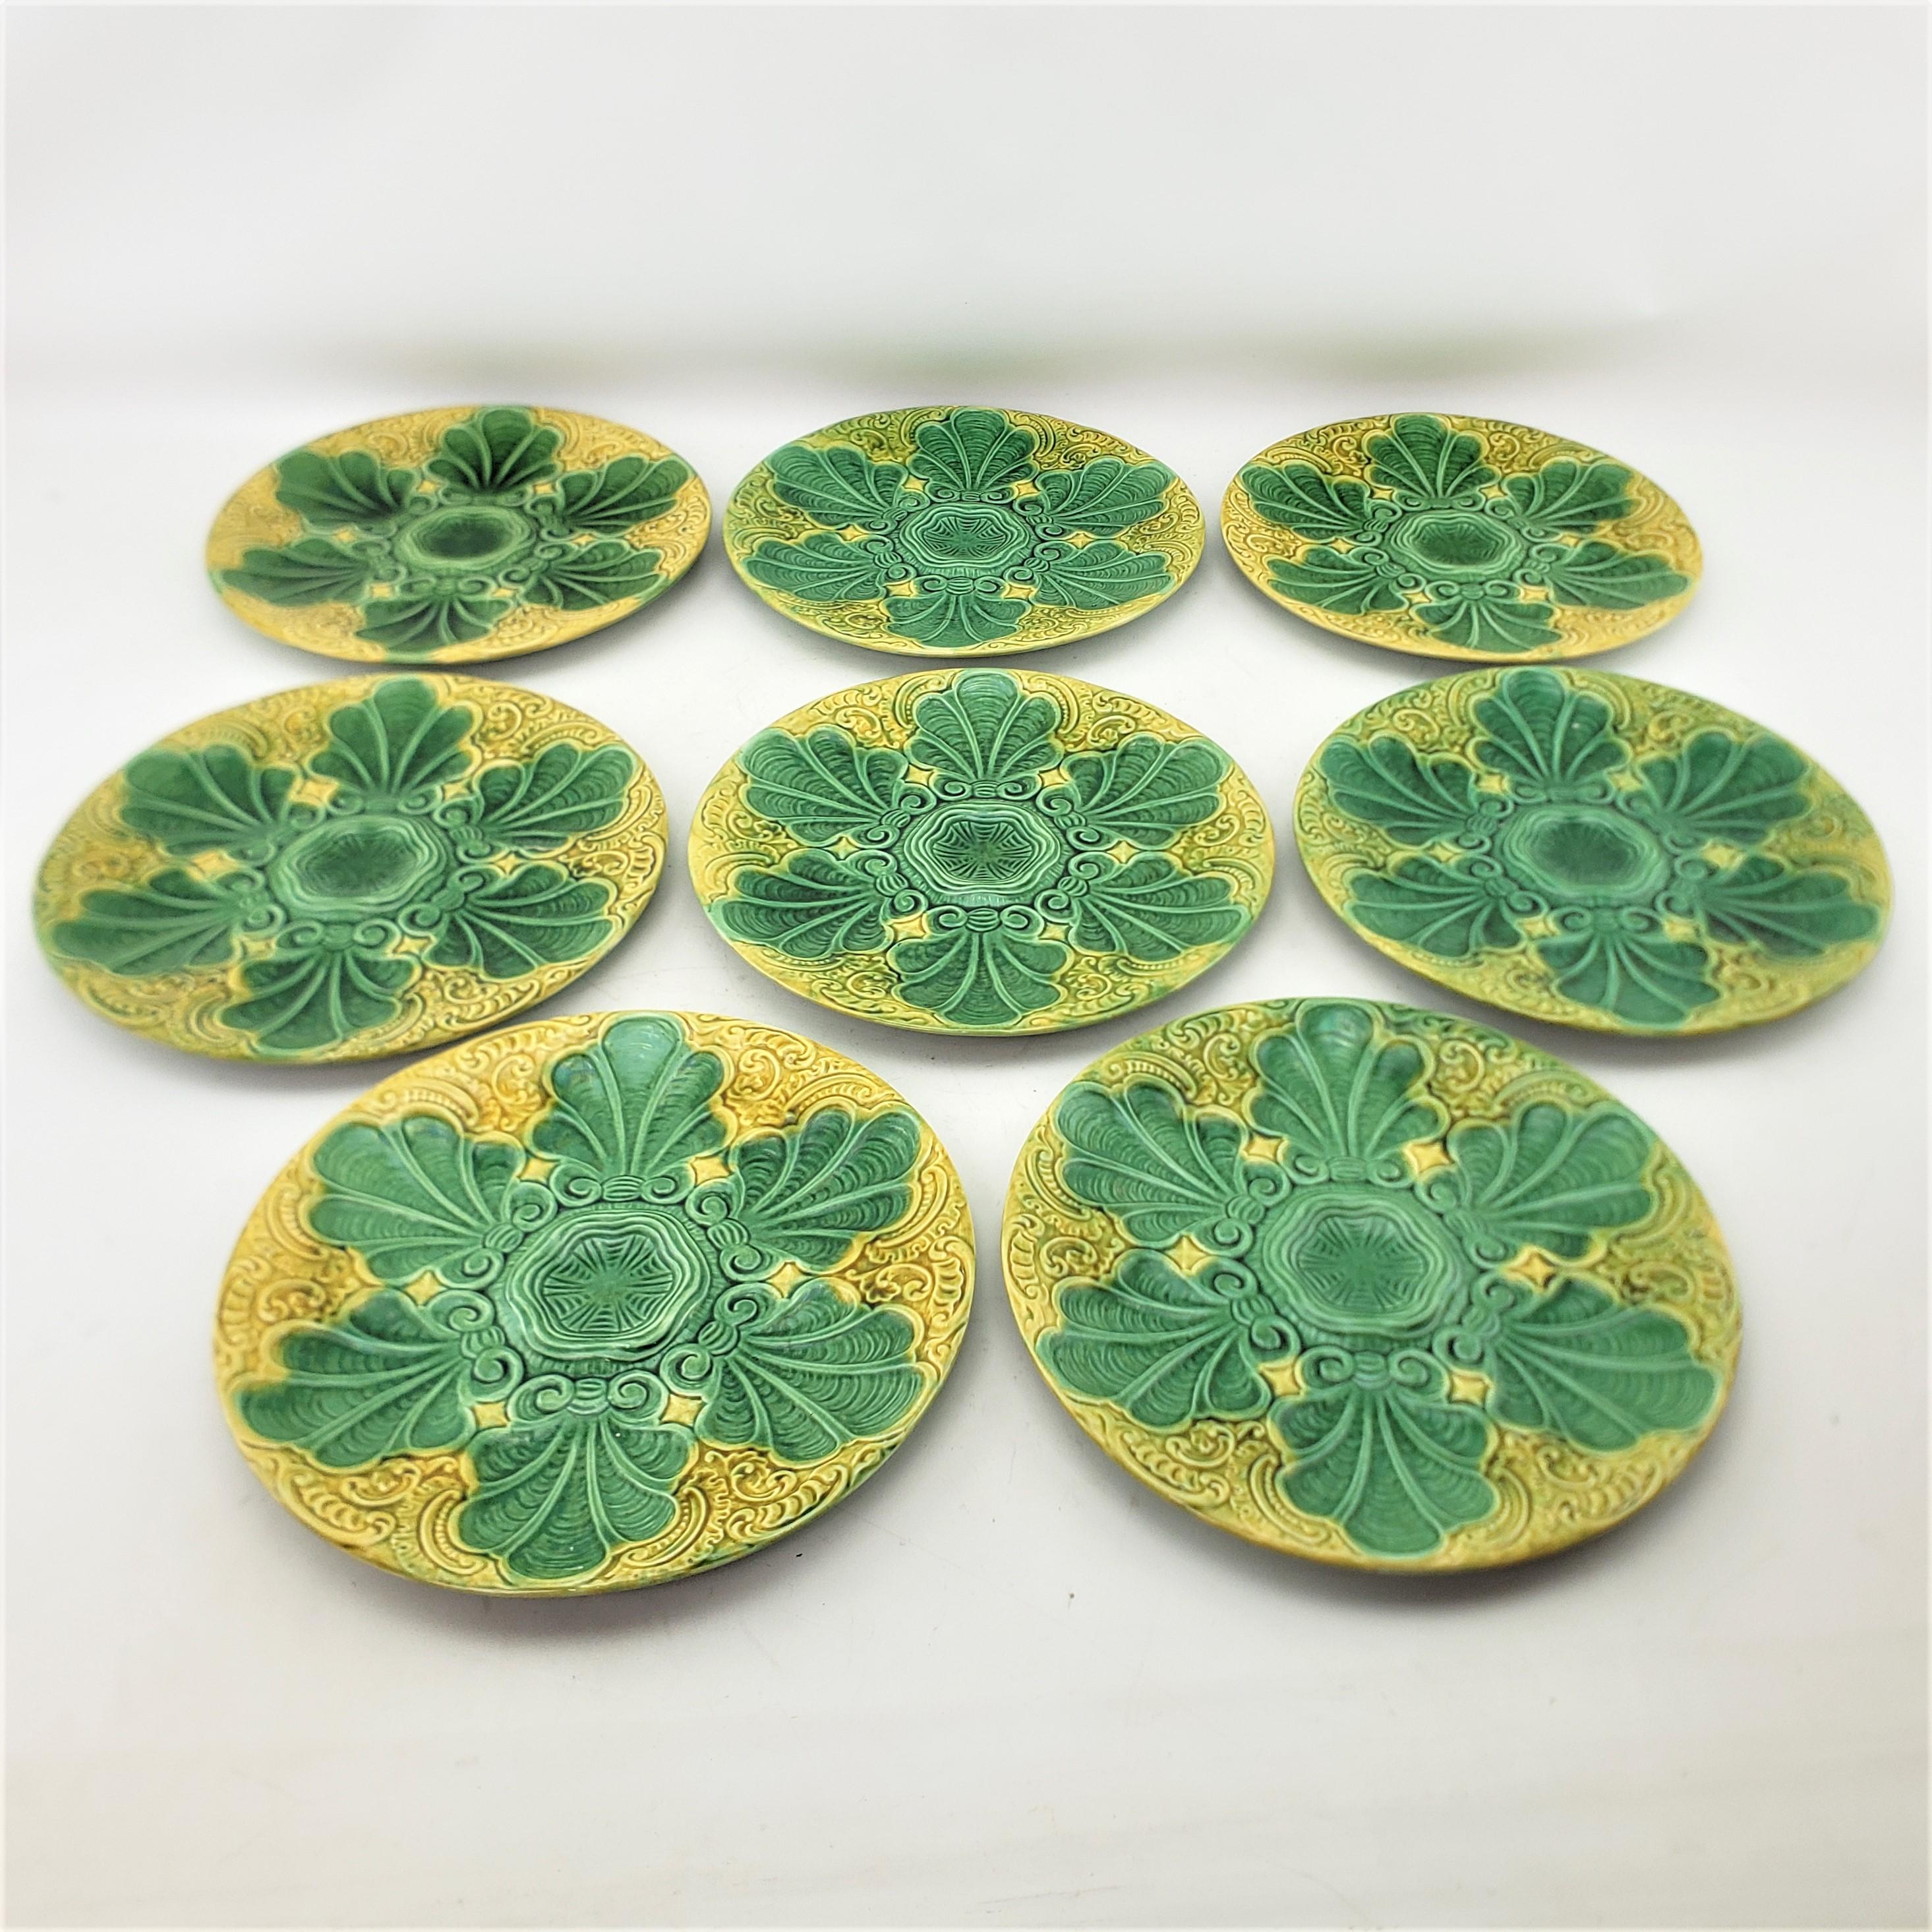 This set of antique oyster or seafood plates are signed by an unknown maker, and presumed to have originated from France and date to approximately 1880 and done in the period Victorian style. The plates are composed of majolica and have a series of